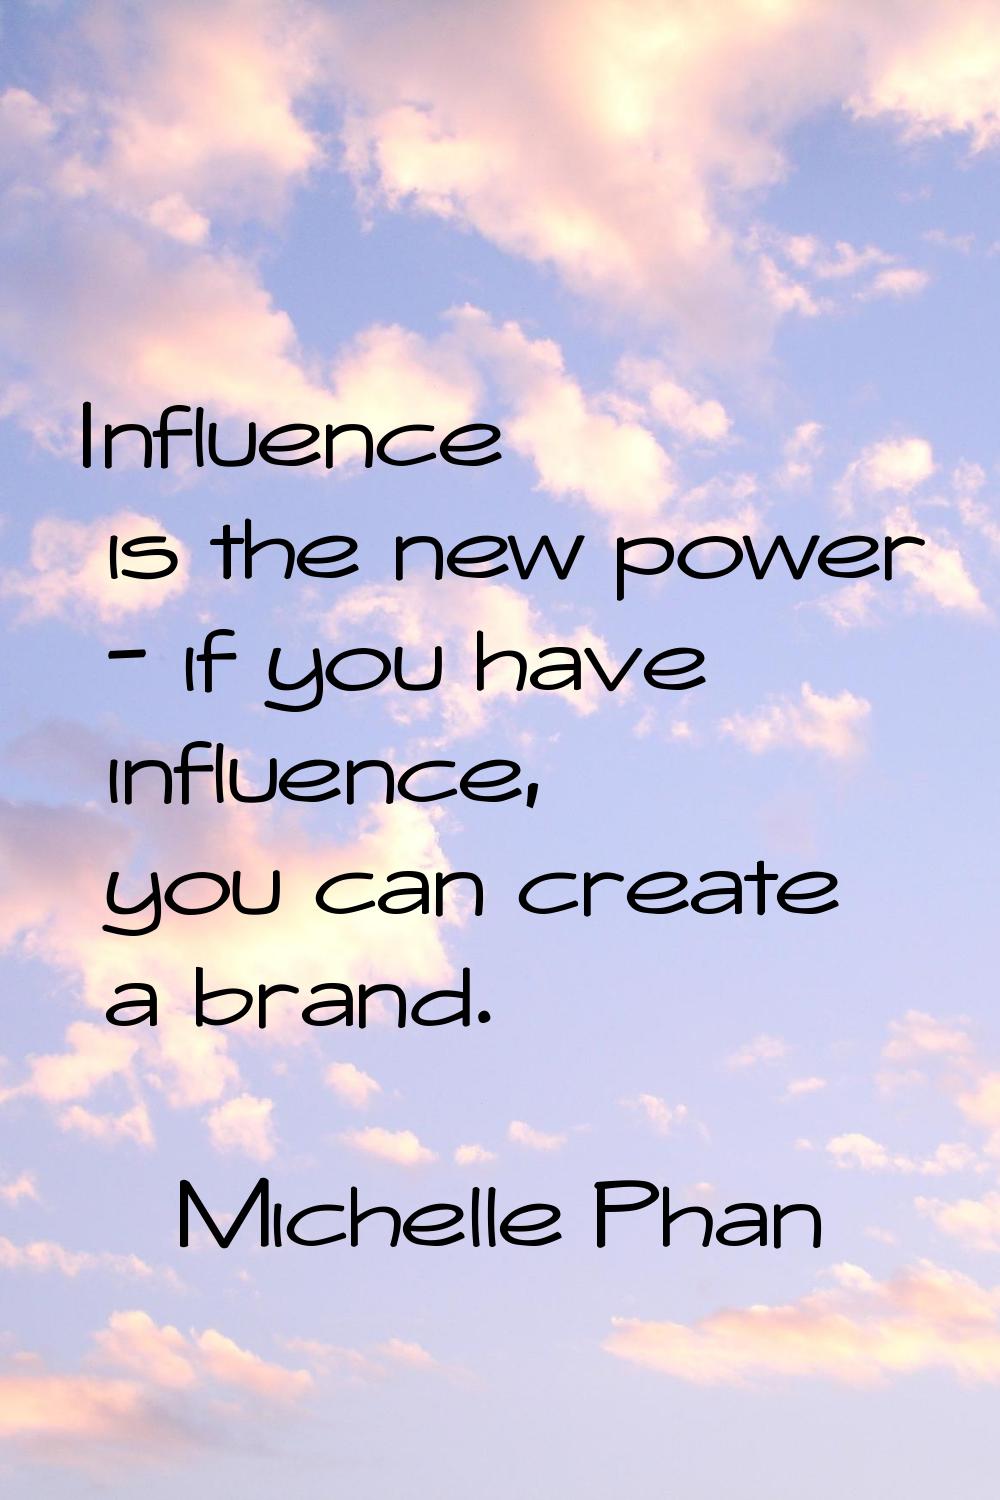 Influence is the new power - if you have influence, you can create a brand.